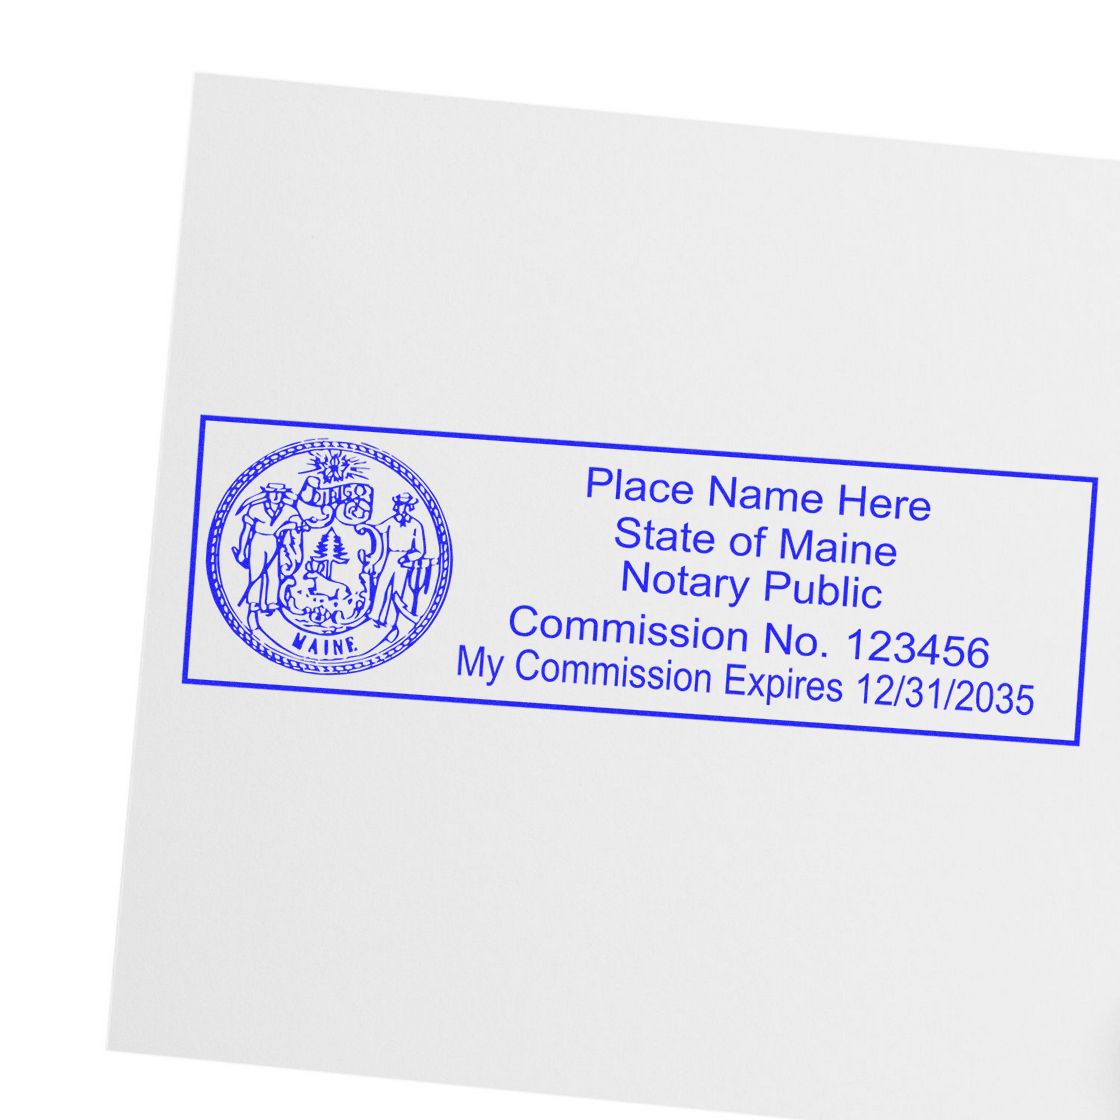 Slim Pre-Inked State Seal Notary Stamp for Maine in use photo showing a stamped imprint of the Slim Pre-Inked State Seal Notary Stamp for Maine